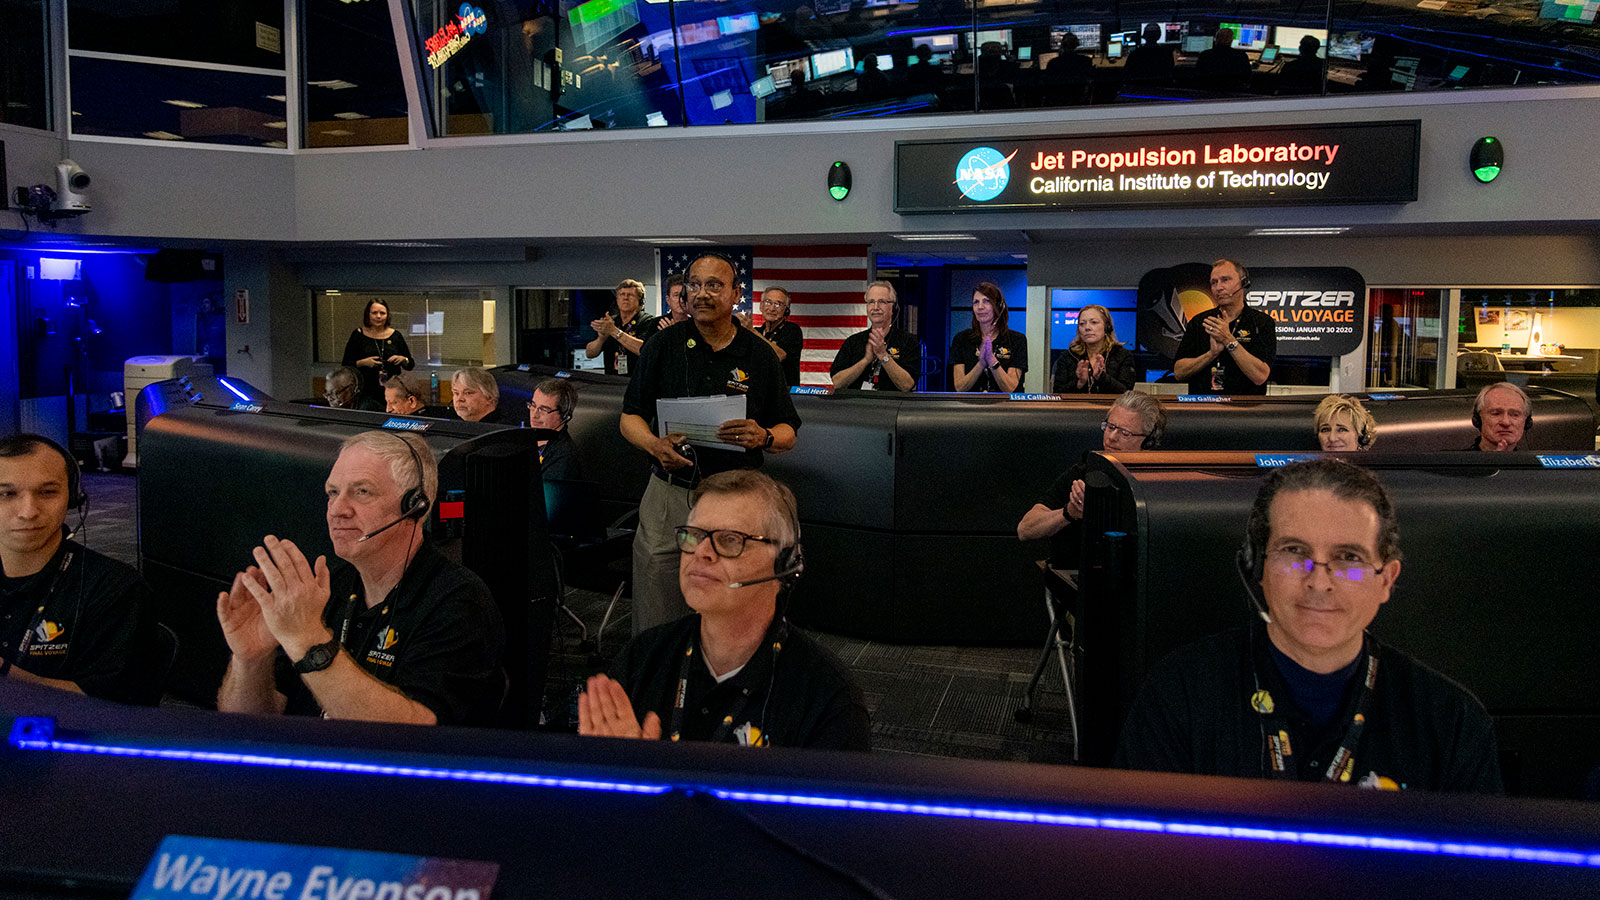 Men and women applauding in mission control as Spitzer's mission is declared over.